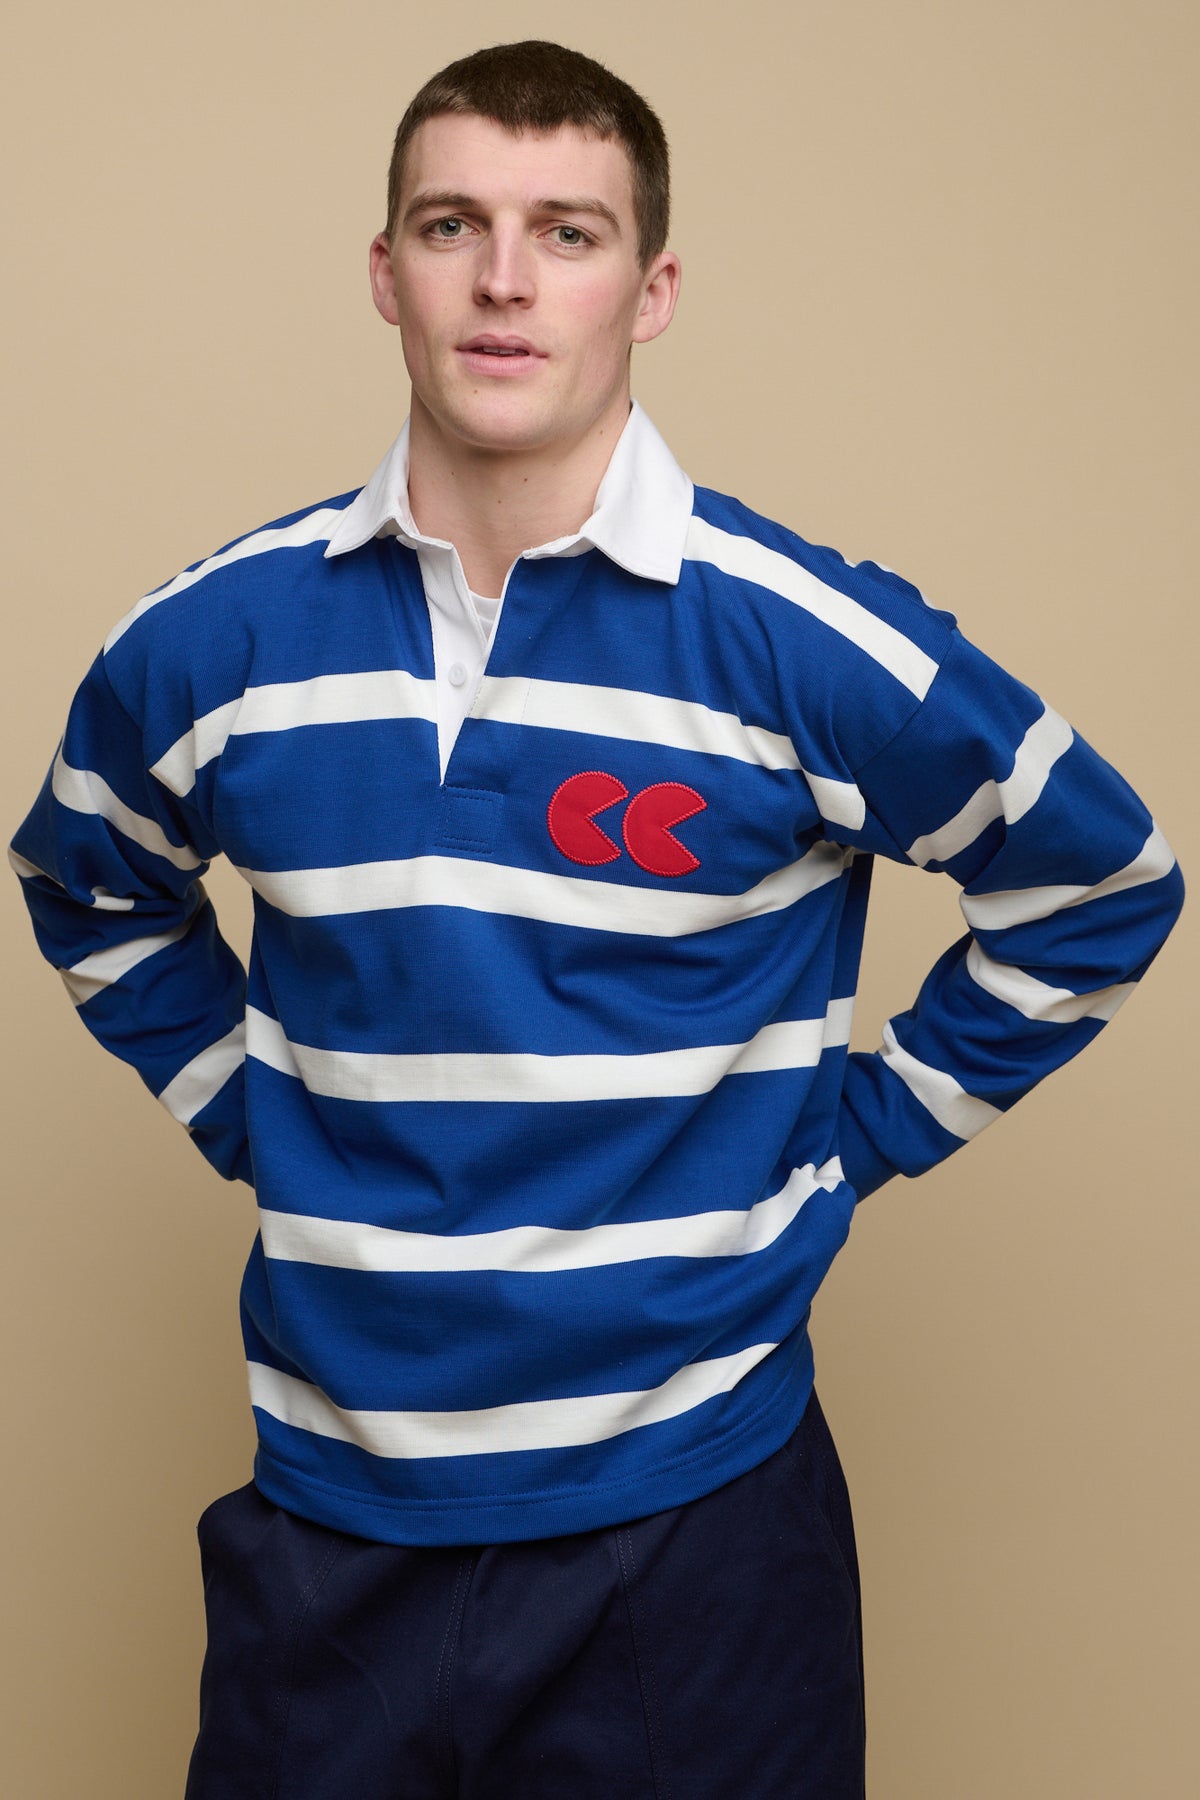 
            Image of brunet male from the thigh up with his hands on the back of his hips wearing blue and white stripe logo rugby shirt with red CC logo patch on chest, worn over crew neck white t shirt